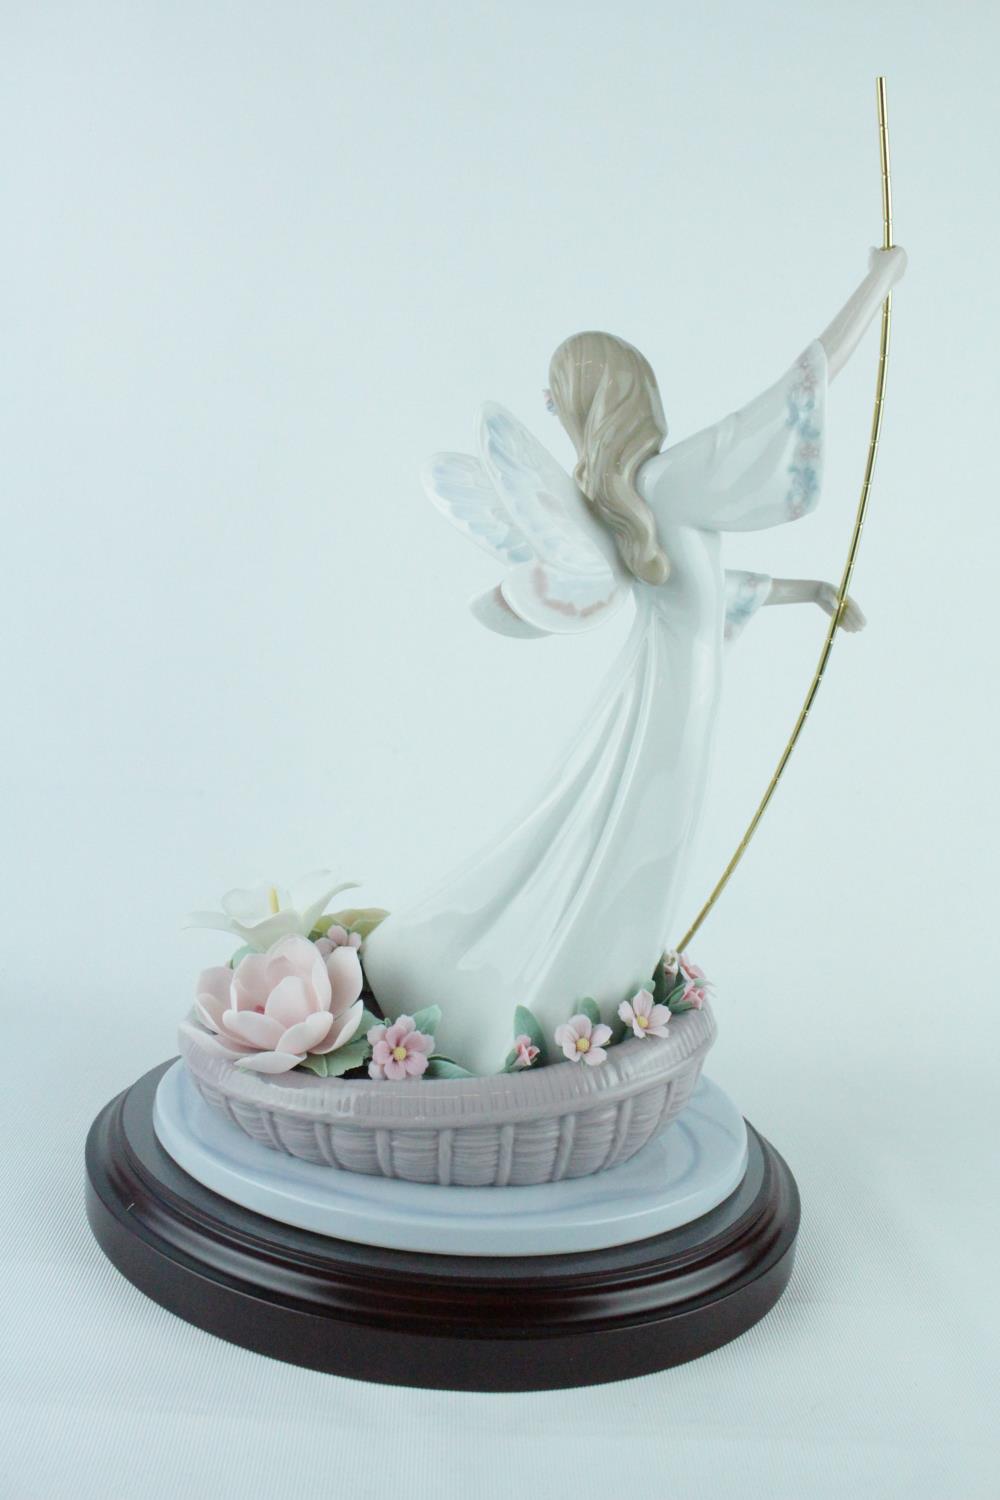 Lladro 'Enchanted Lake', Limited Edition 2320 of 4000, Sculptor: Juan Coderch, Artist: P. Perez. - Image 2 of 8